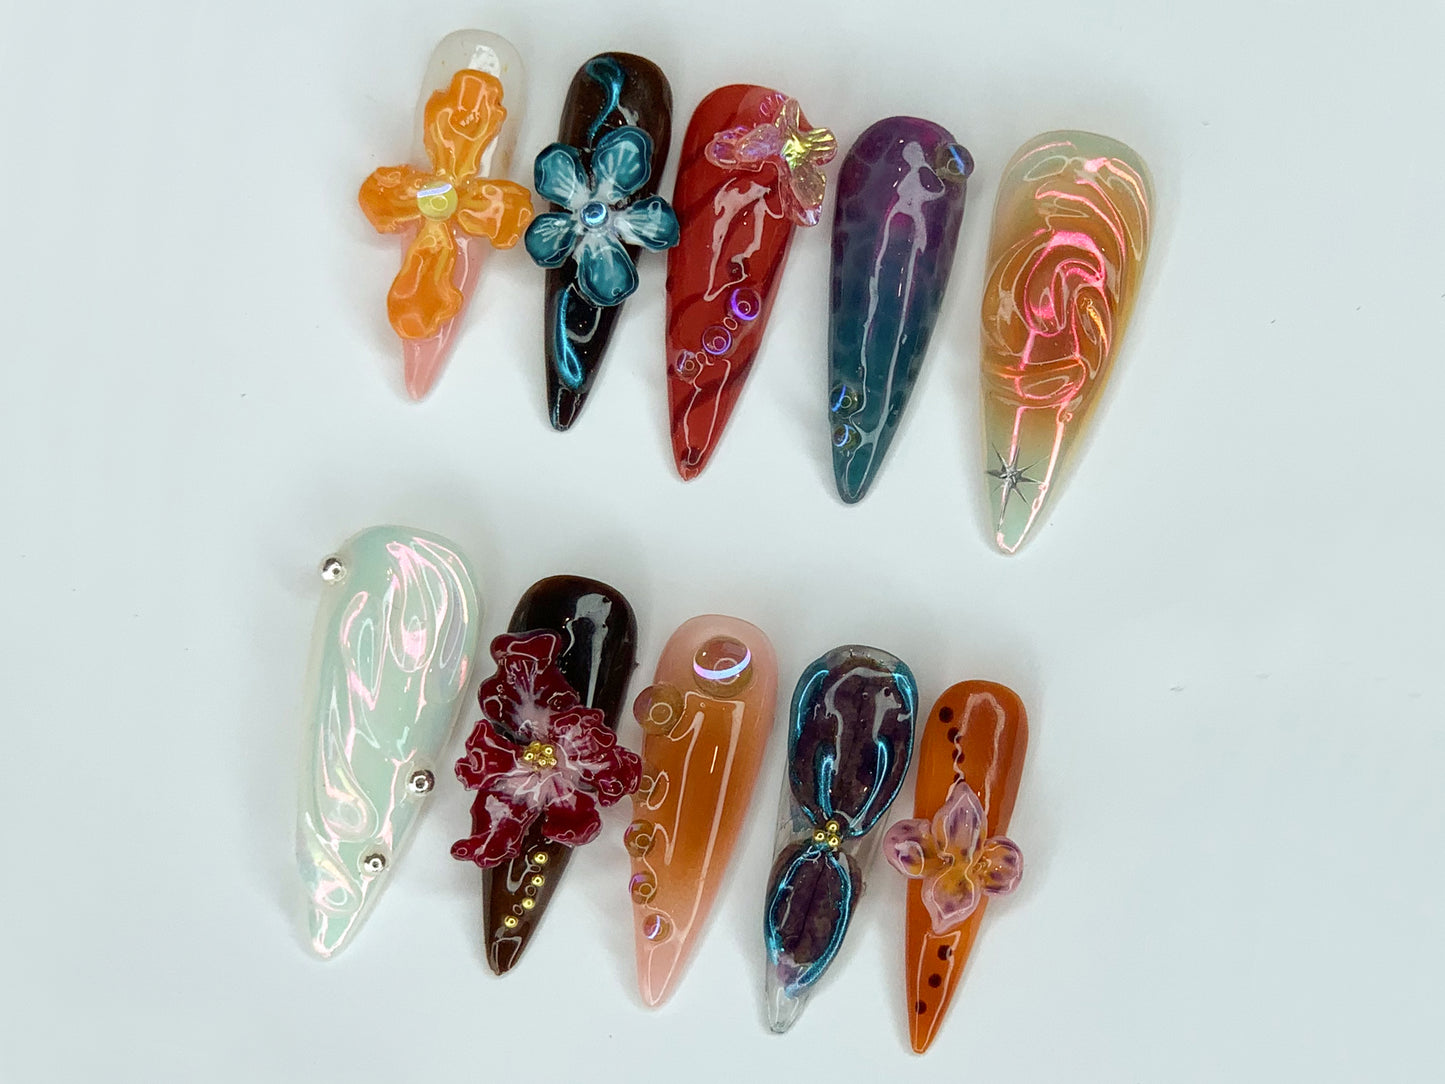 3D Flower Long Stiletto Handmade Press On Nails | Spring Floral Garden Theme | Prom Nails | Butterfly Charm | Gift For Her | J256